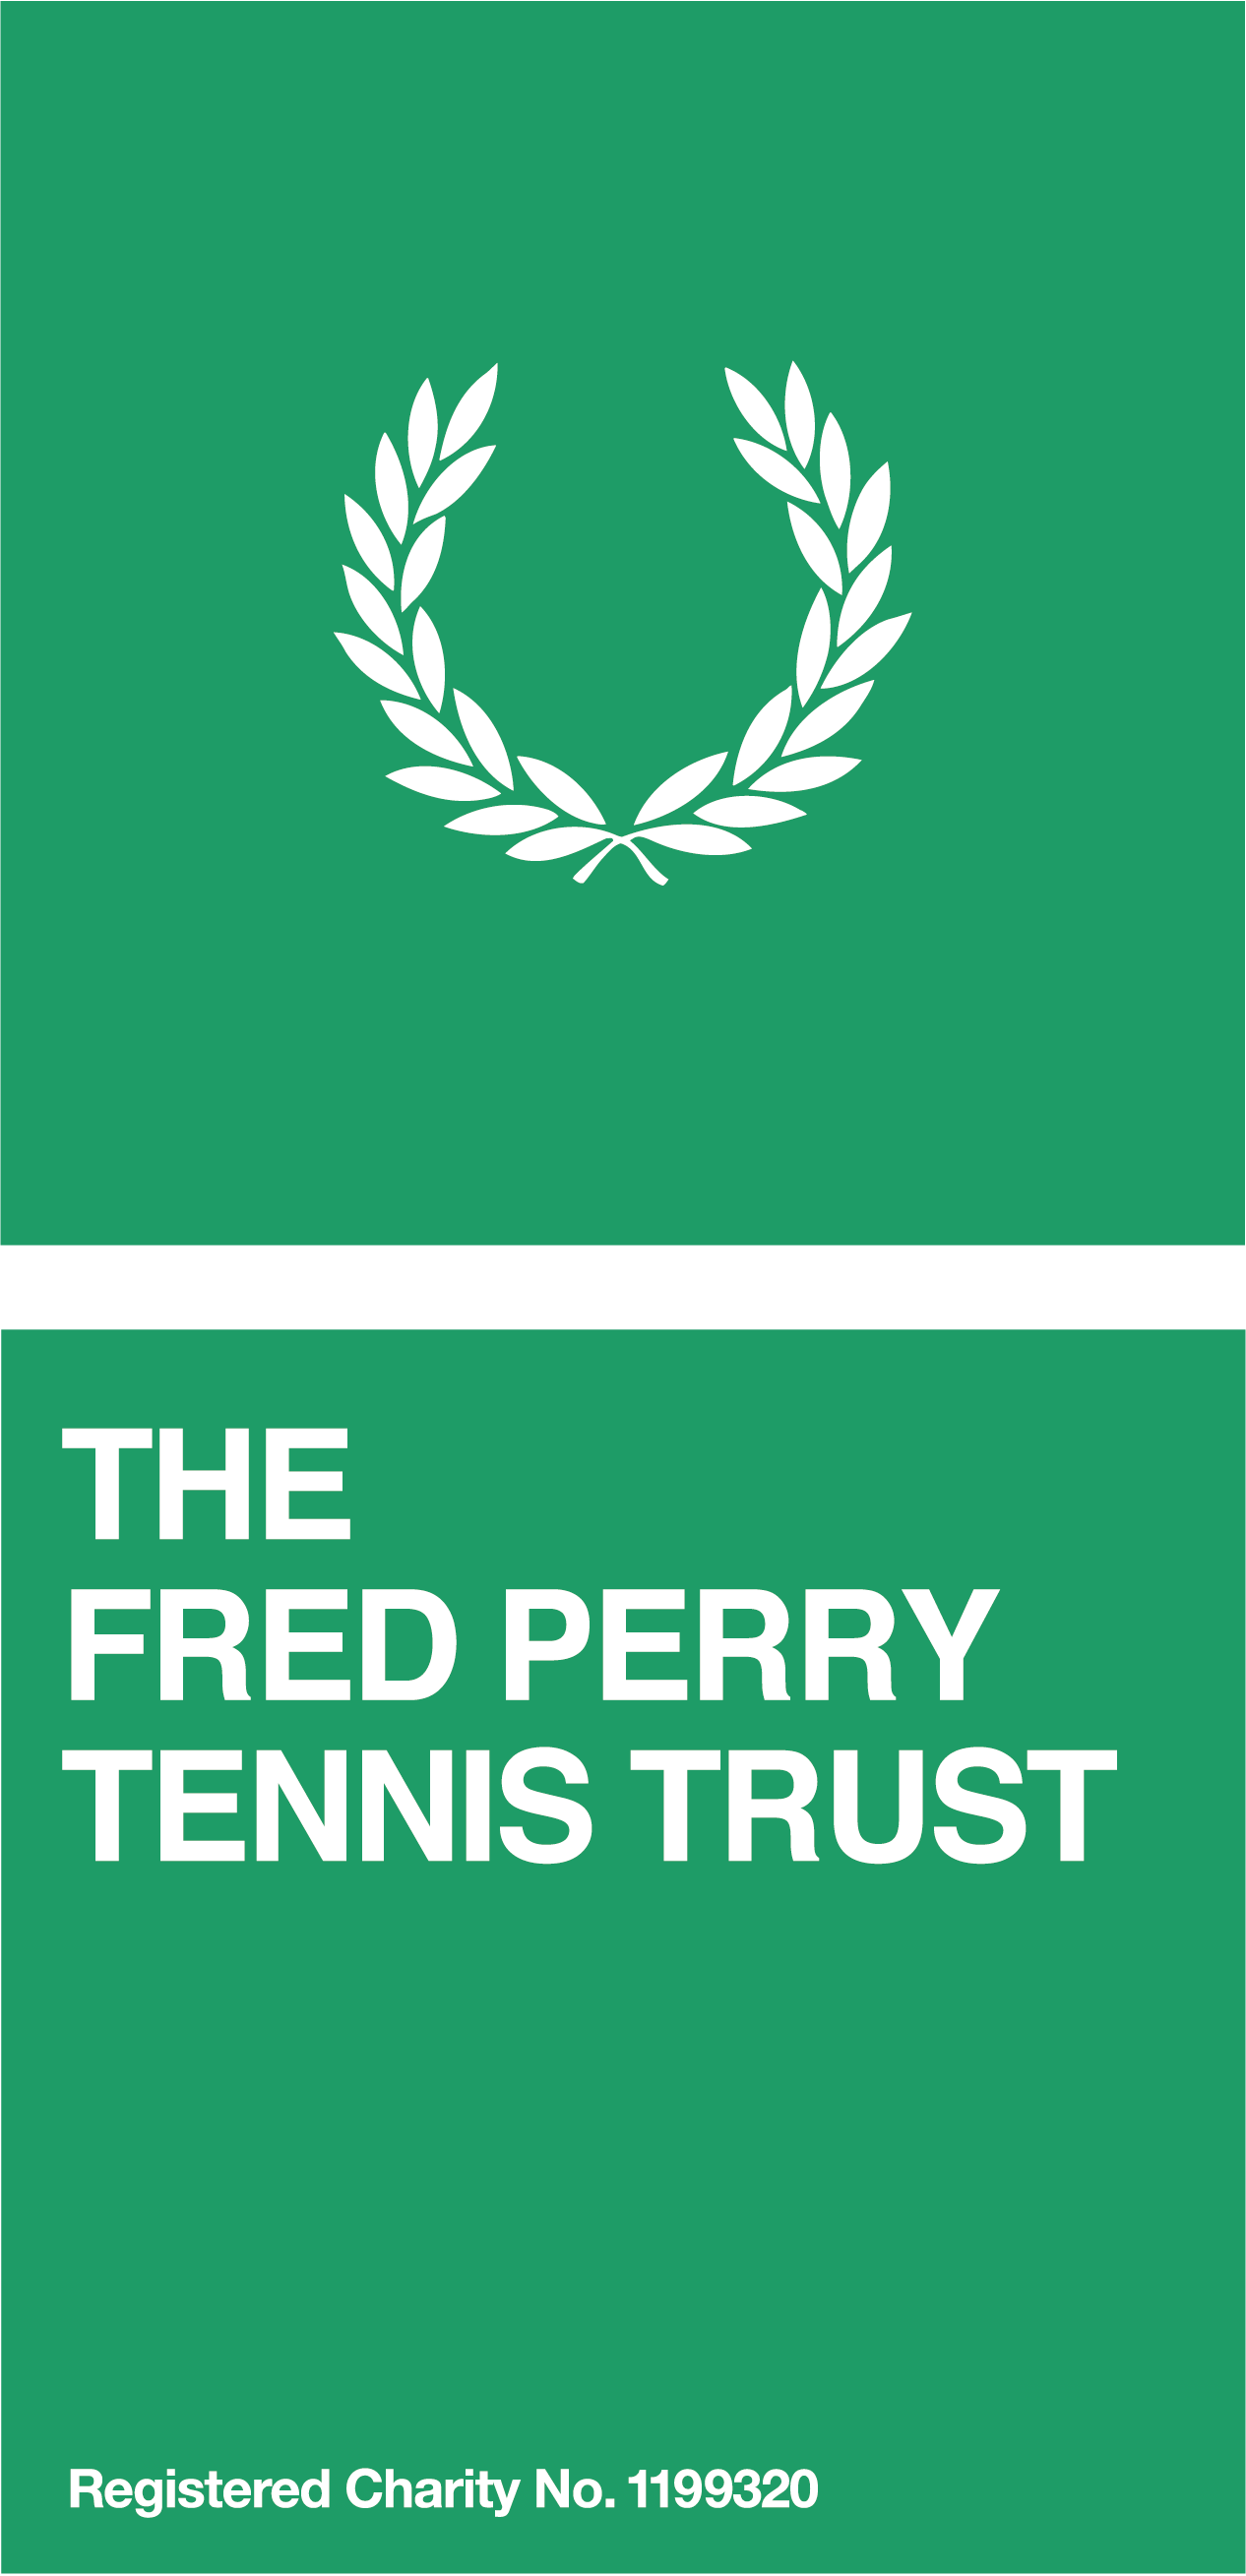 The Fred Perry Tennis Trust Home page